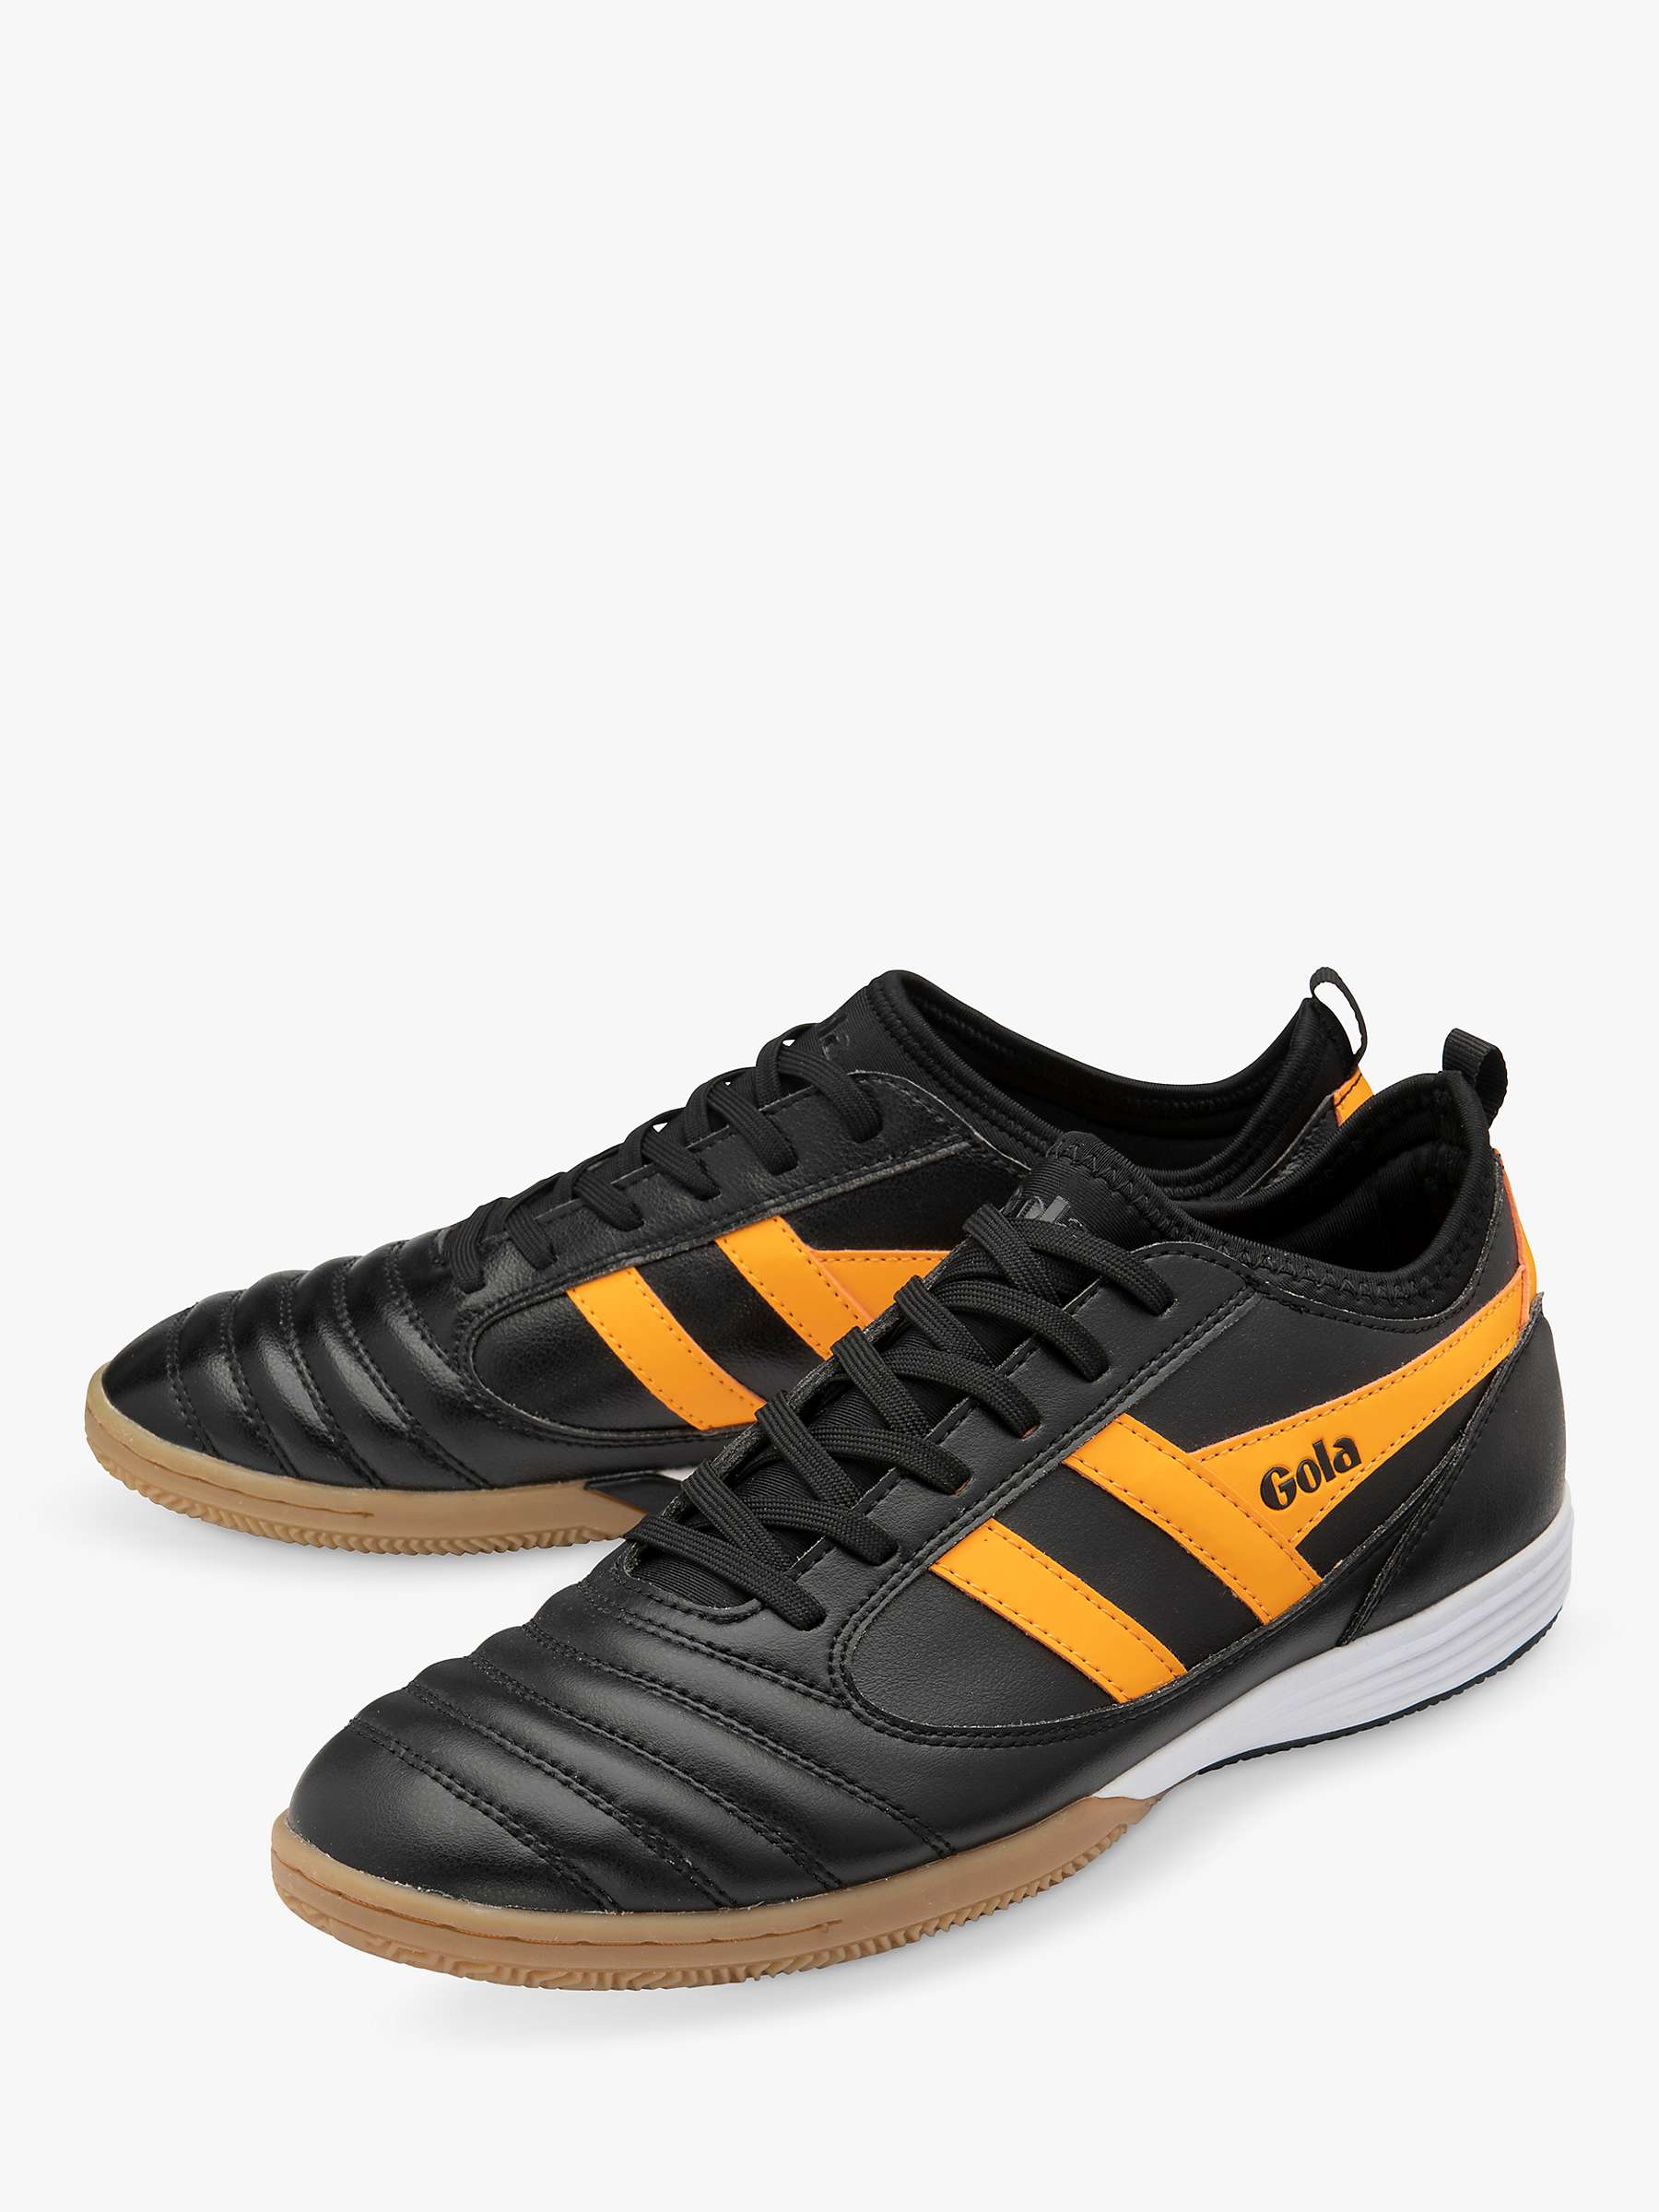 Buy Gola Kids' Performance Ceptor TX Football Trainers Online at johnlewis.com